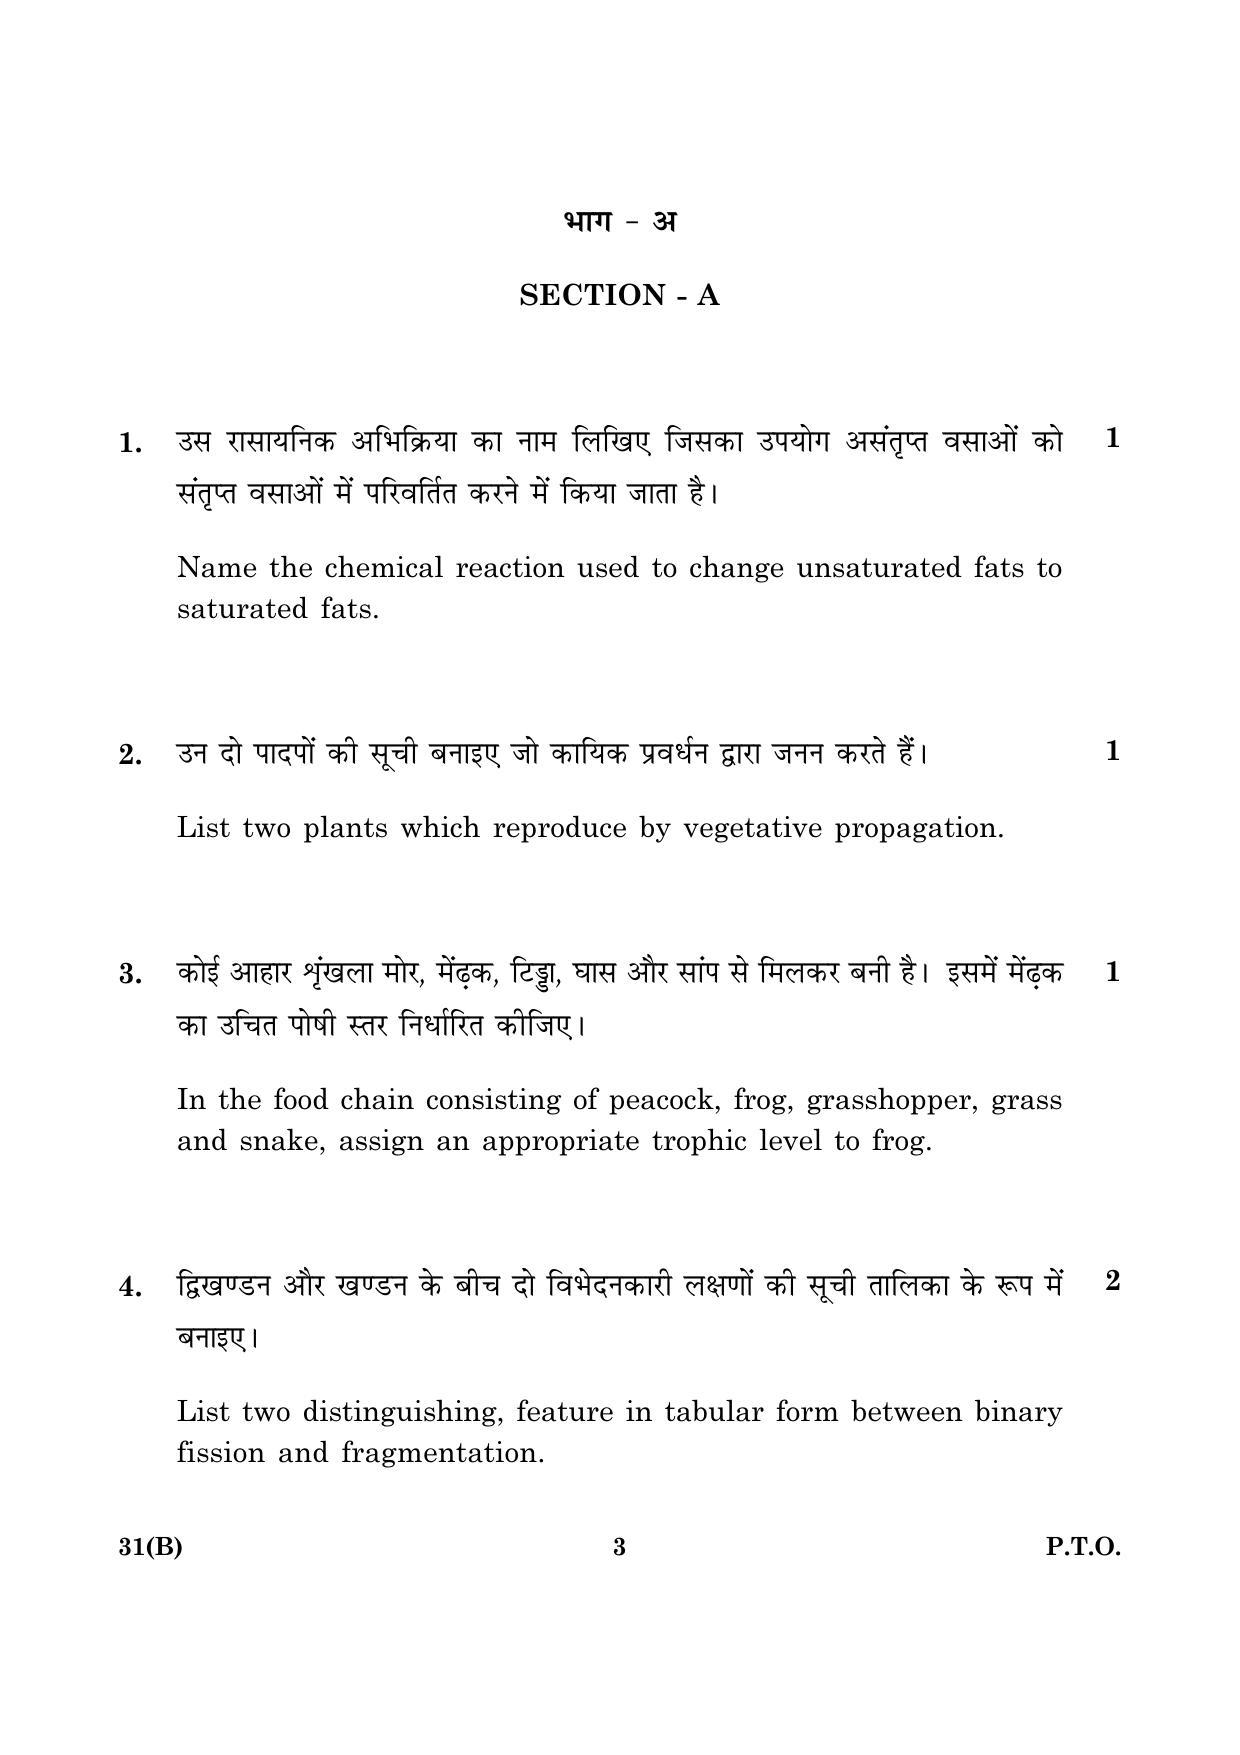 CBSE Class 10 031(B) Science 2016 Question Paper - Page 3